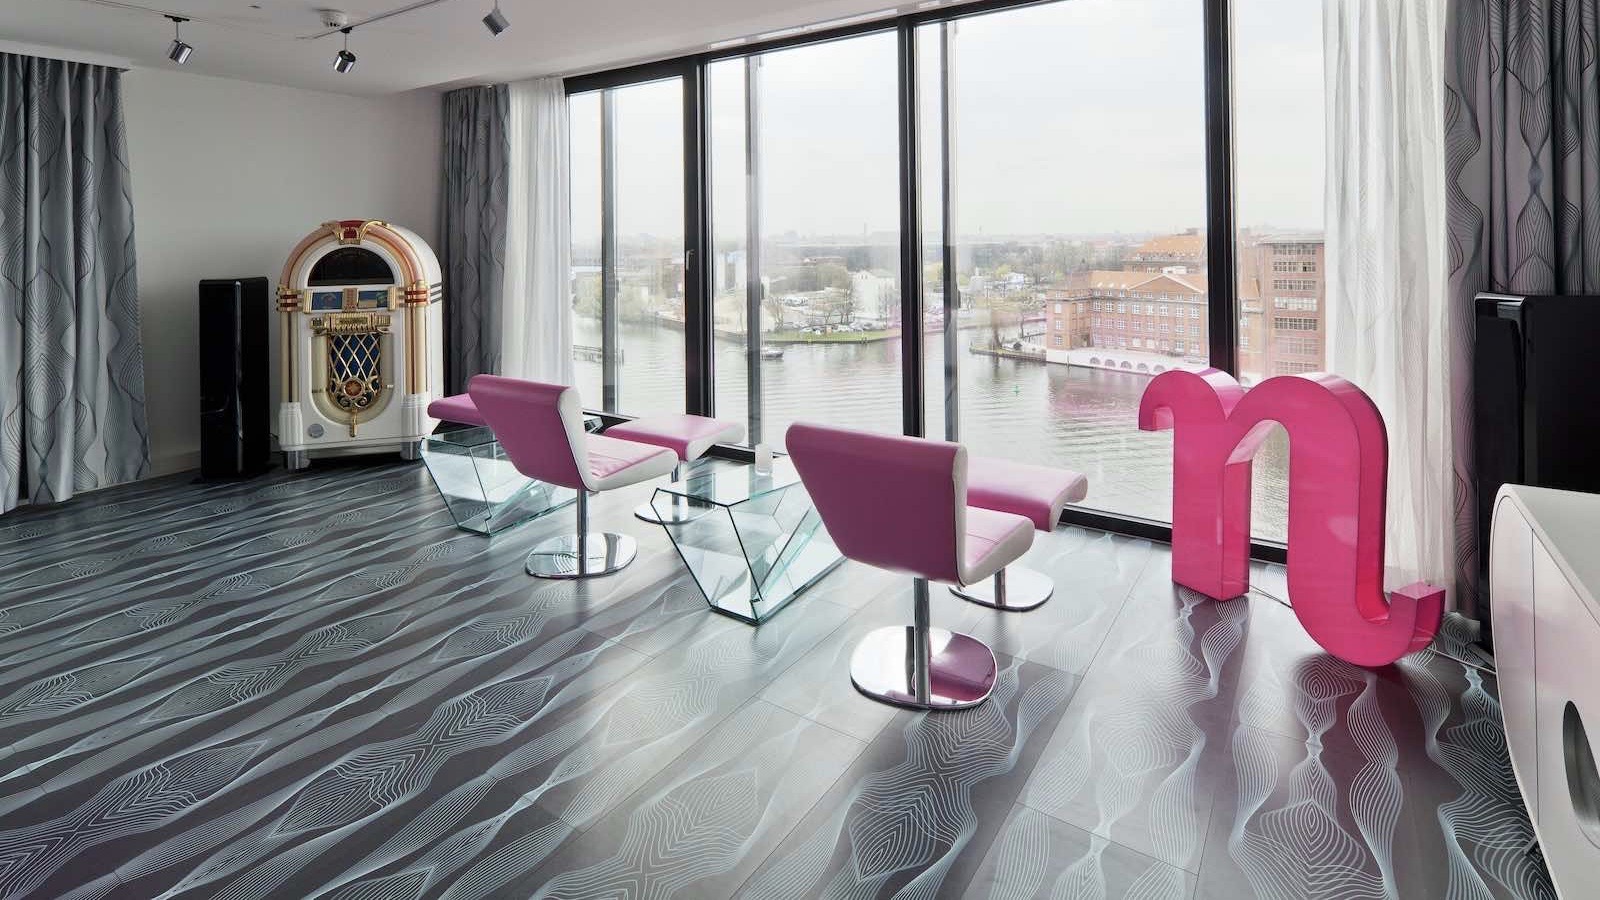 nhow berlin- pink chairs juke box and river views in one of the coolest hotels in berlin